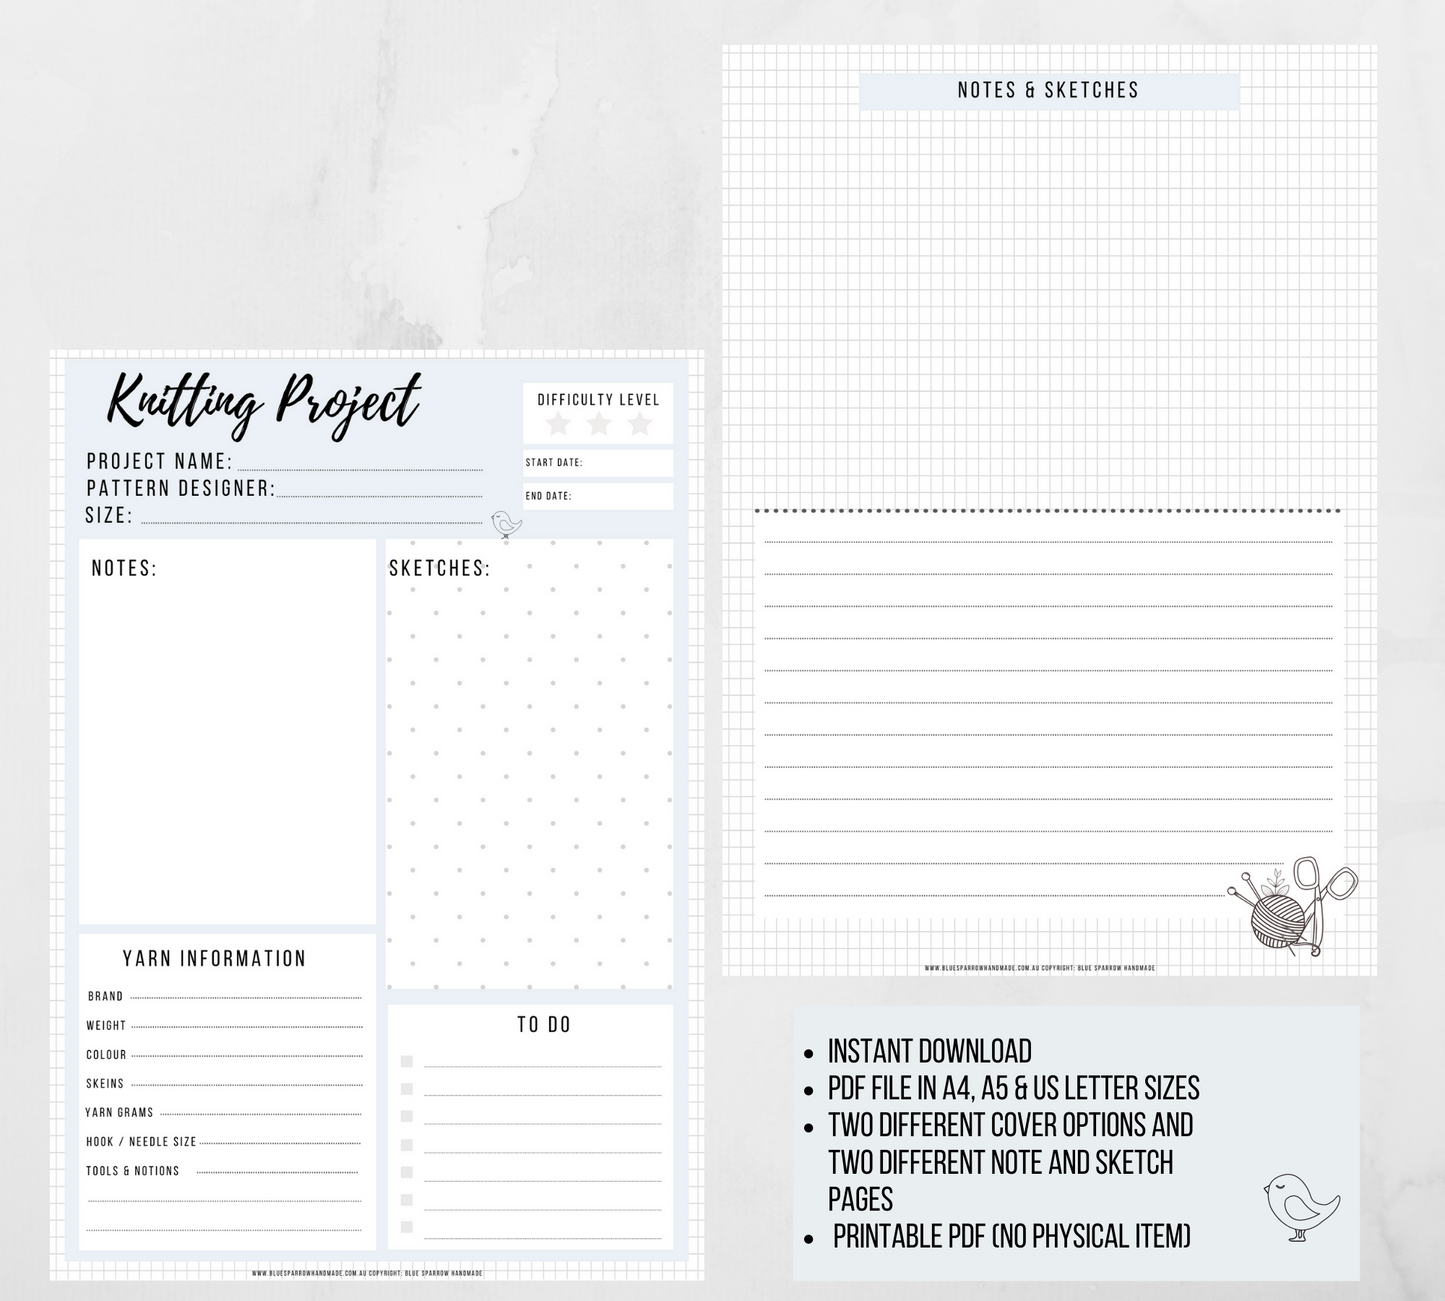 Knitting Project Planner - Printable